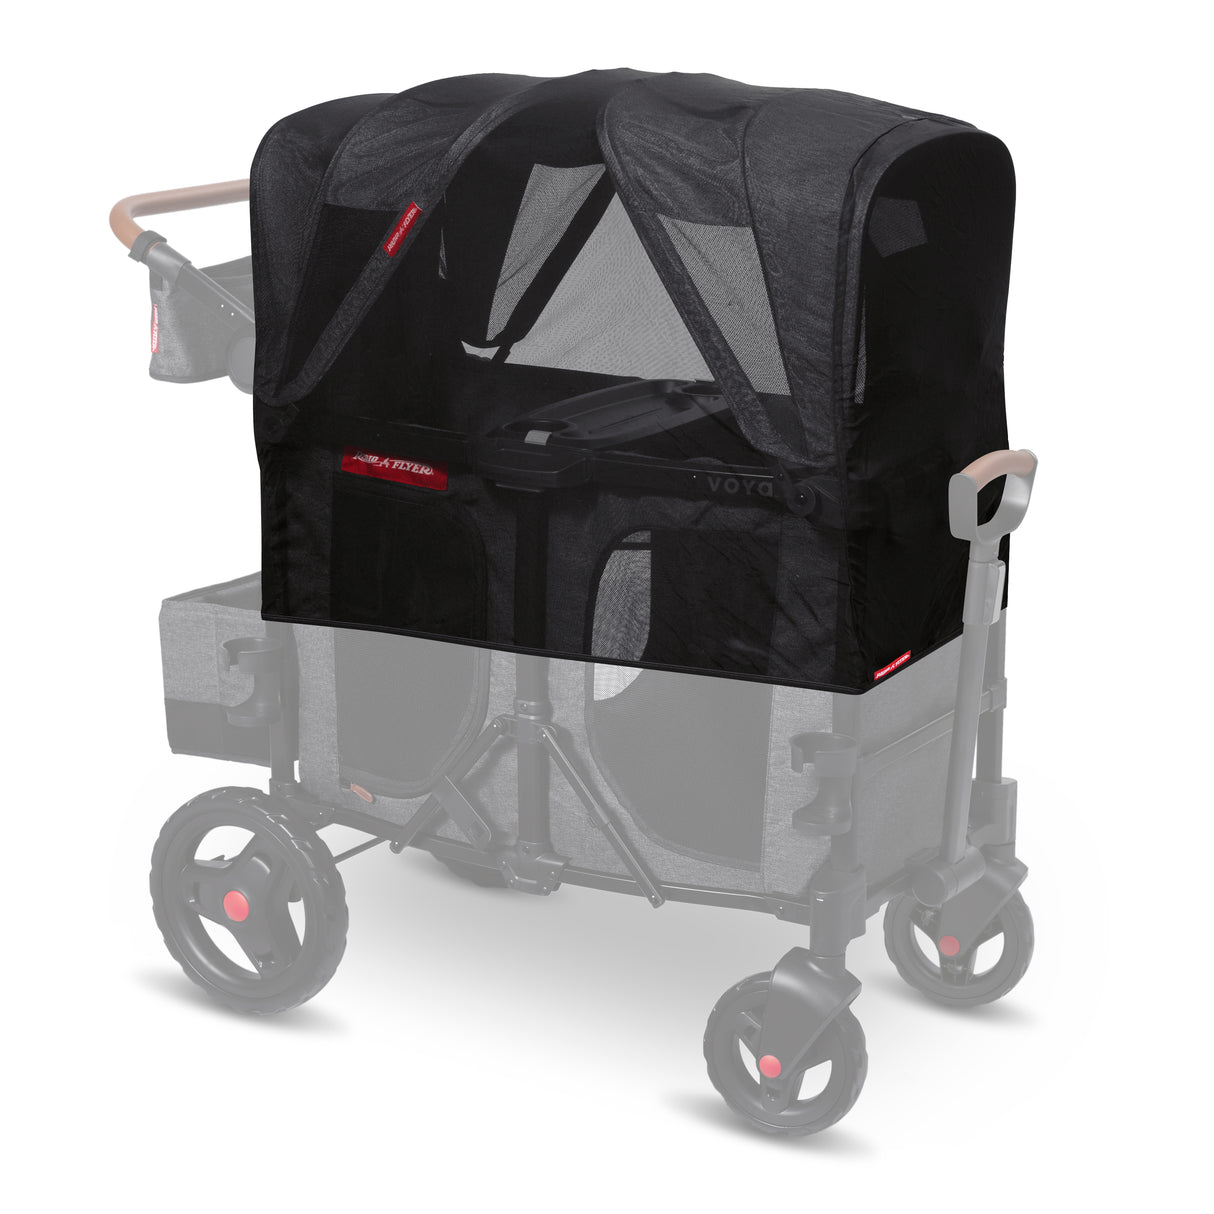 Mosquito Mesh with Bag - Voya™ XT Stroller Wagon